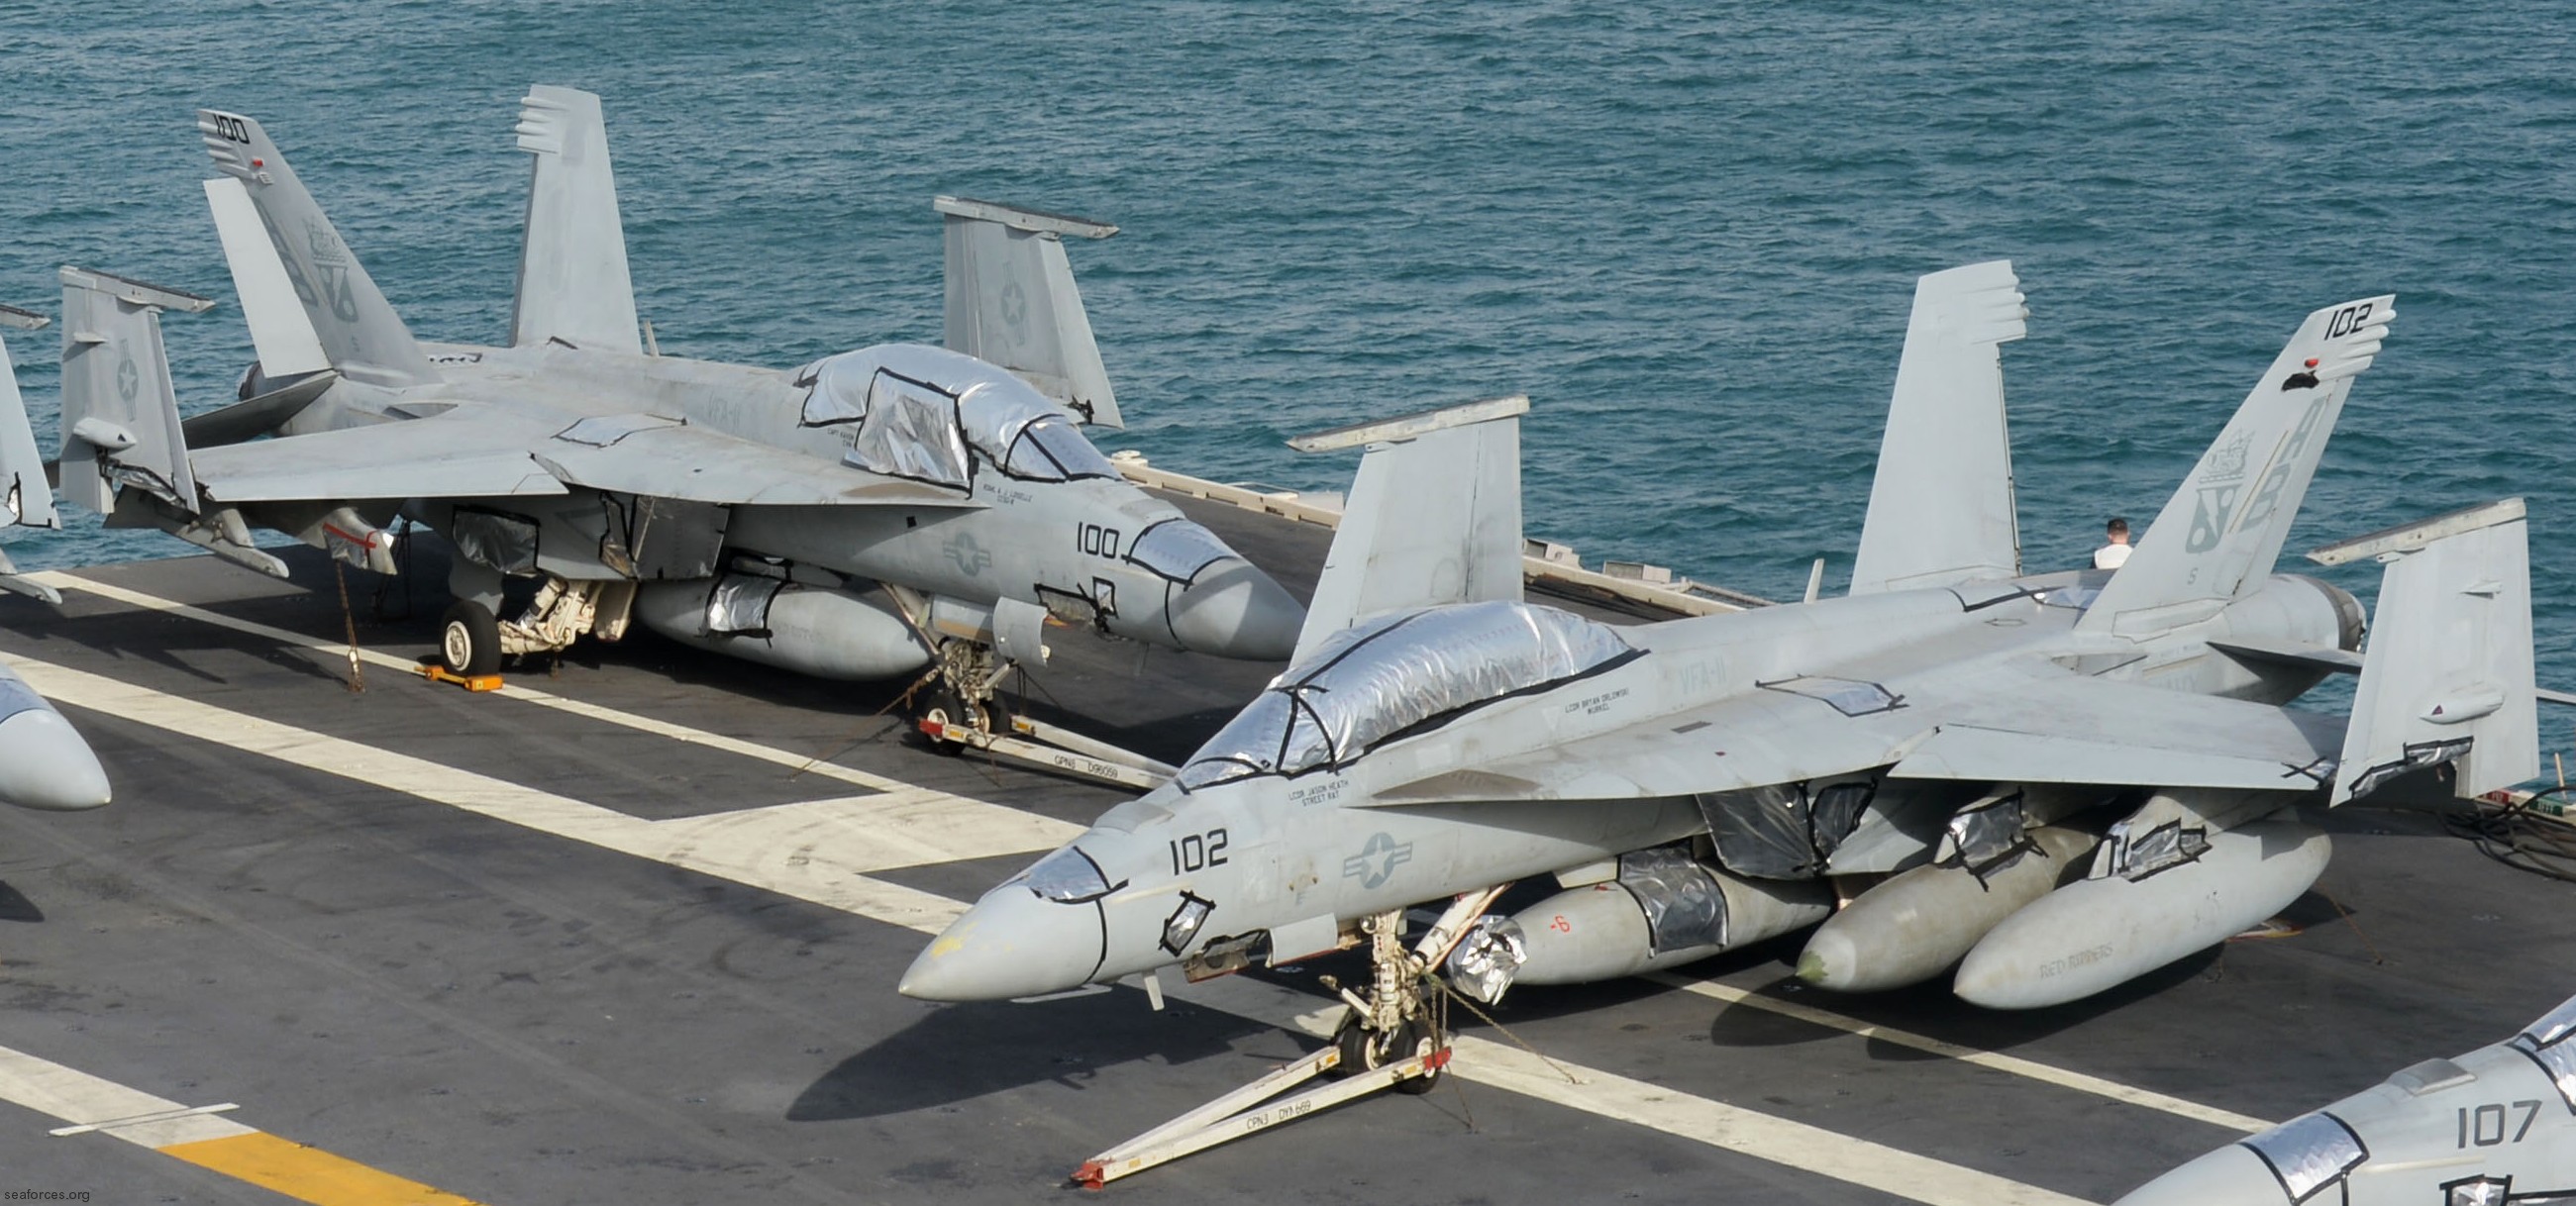 vfa-11 red rippers strike fighter squadron us navy f/a-18f super hornet carrier air wing cvw-1 uss harry s. truman cvn-75 64 suez transit